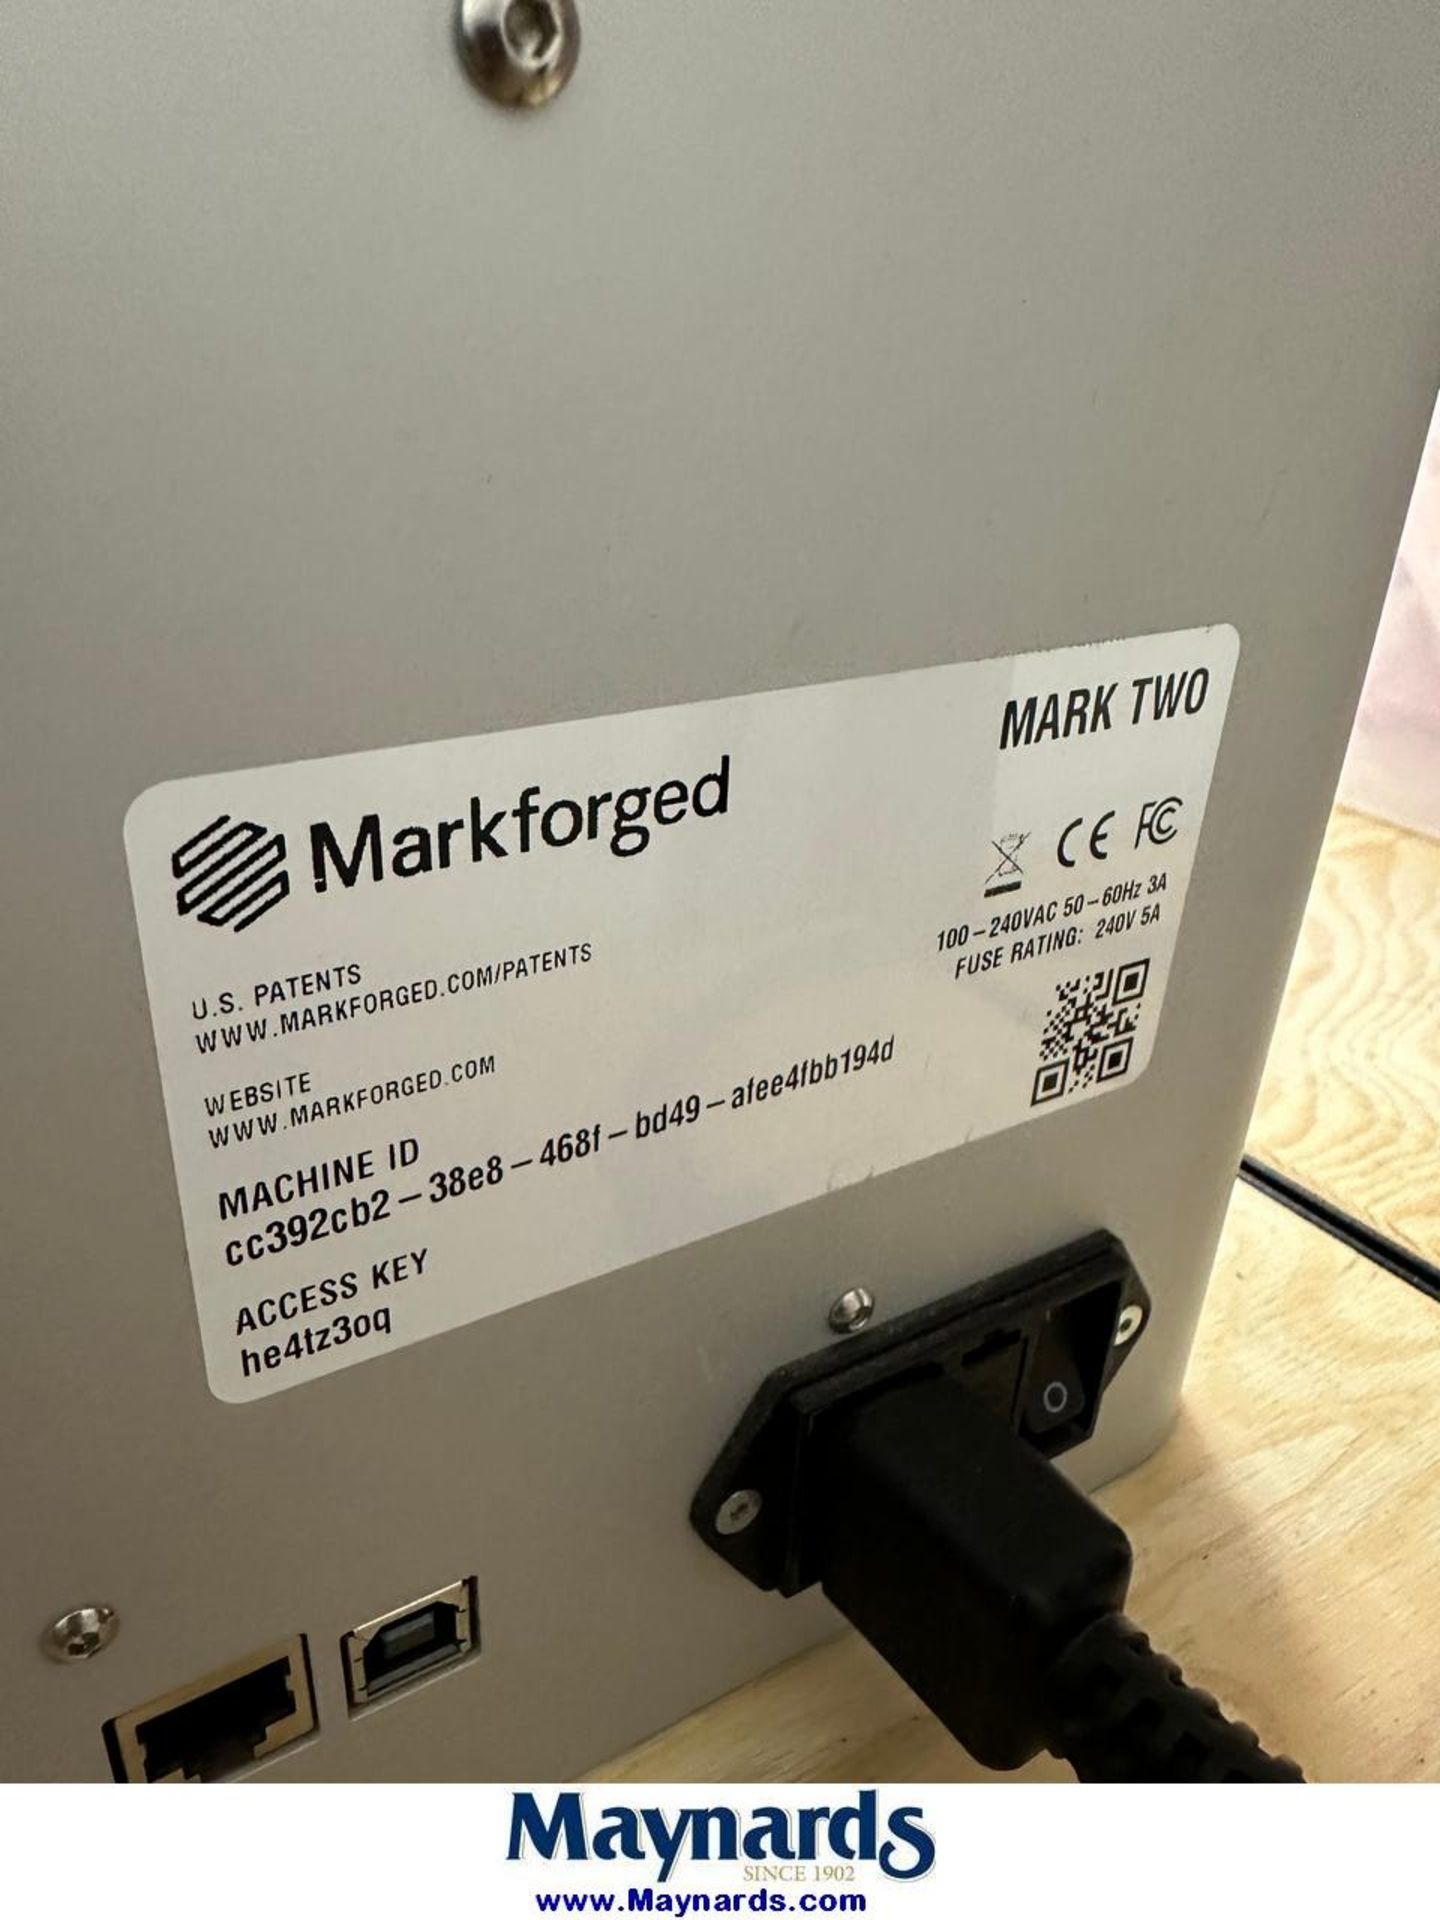 Markforged Mark Two 3D printer - Image 2 of 3